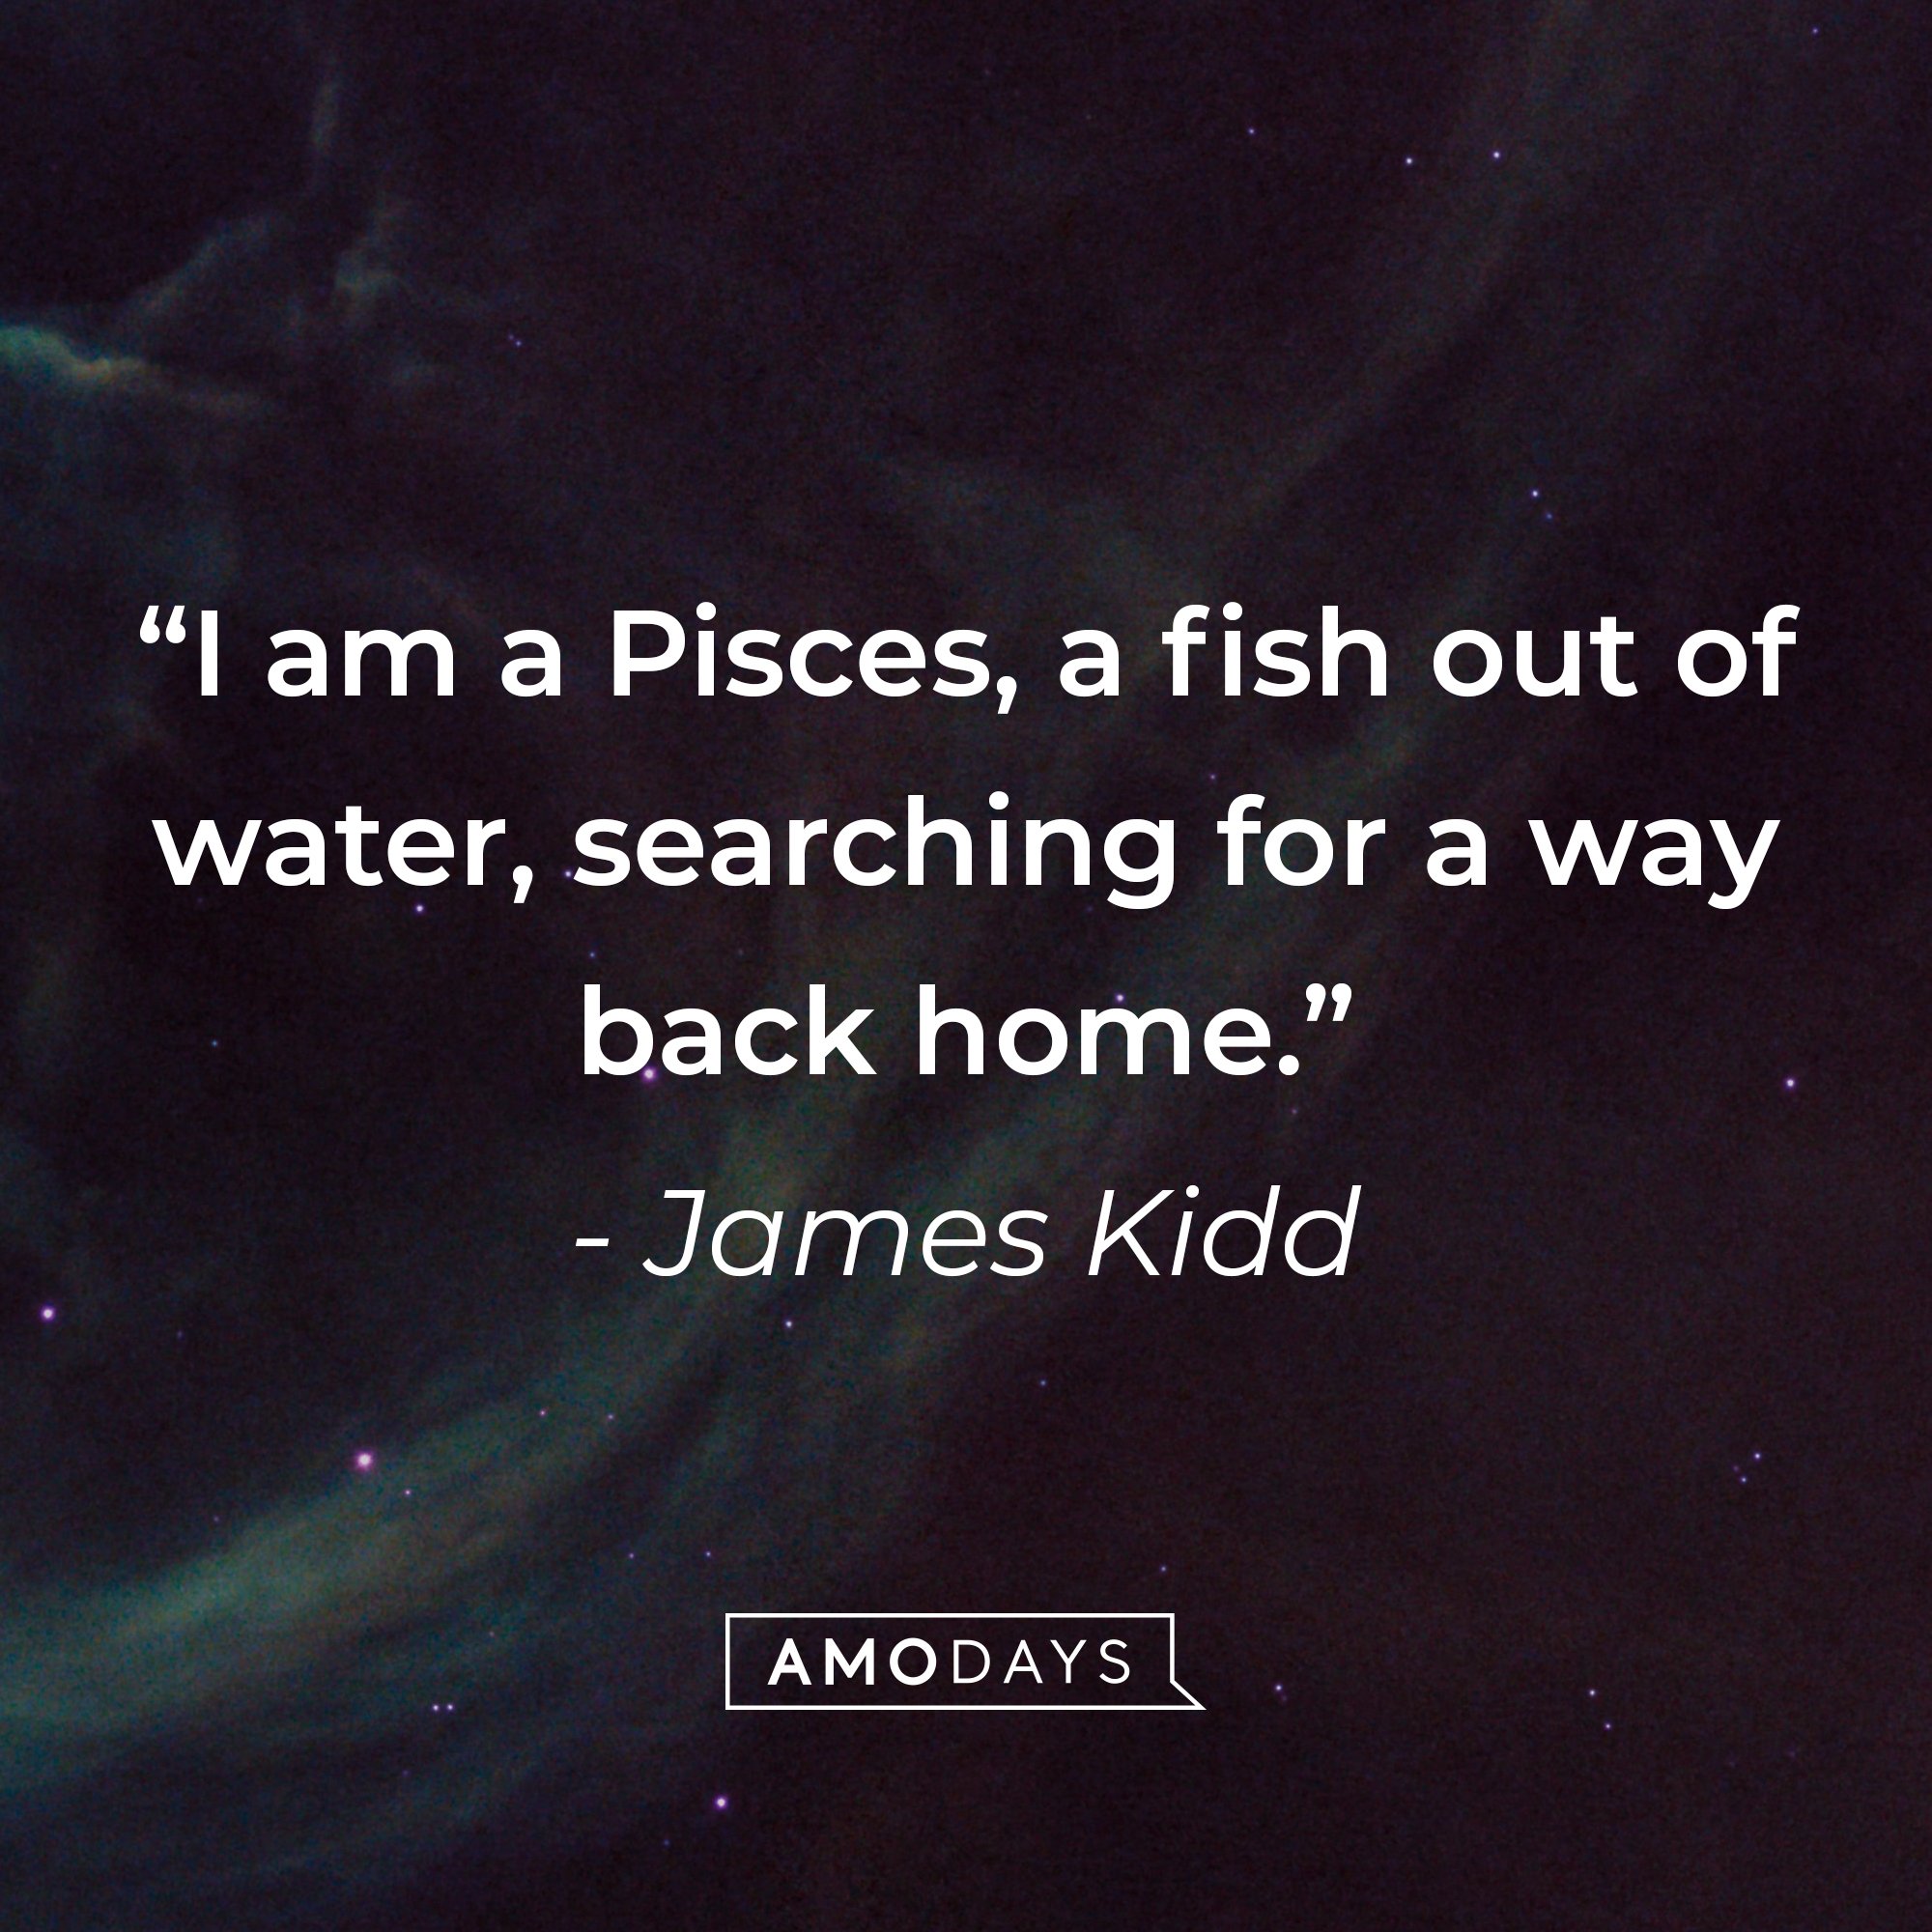 James Kidd's quote: "I am a Pisces, a fish out of water, searching for a way back home." | Image: AmoDays